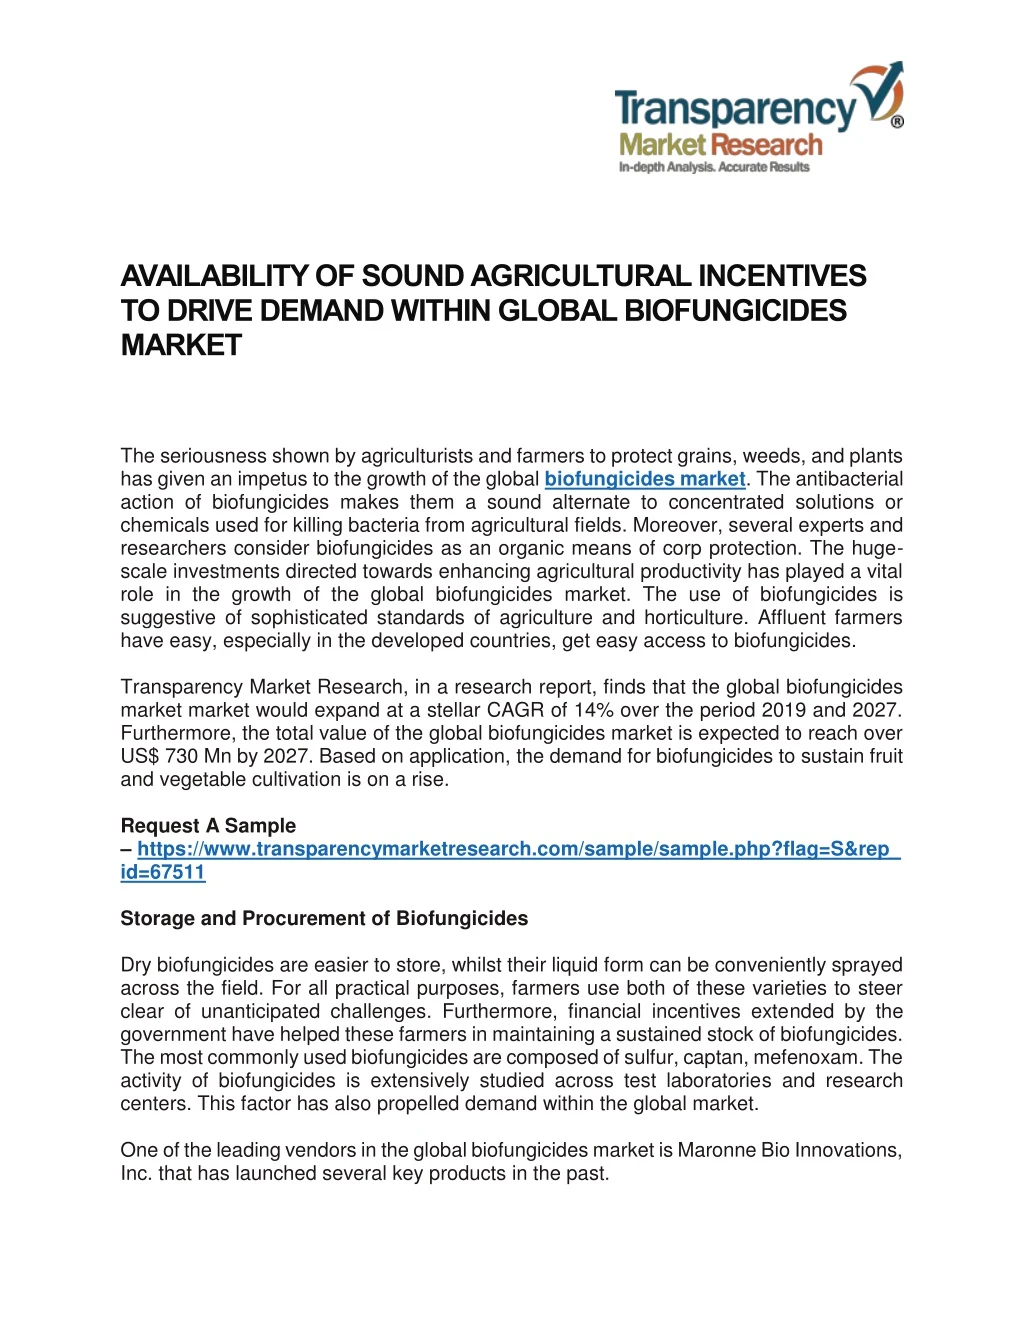 availability of sound agricultural incentives